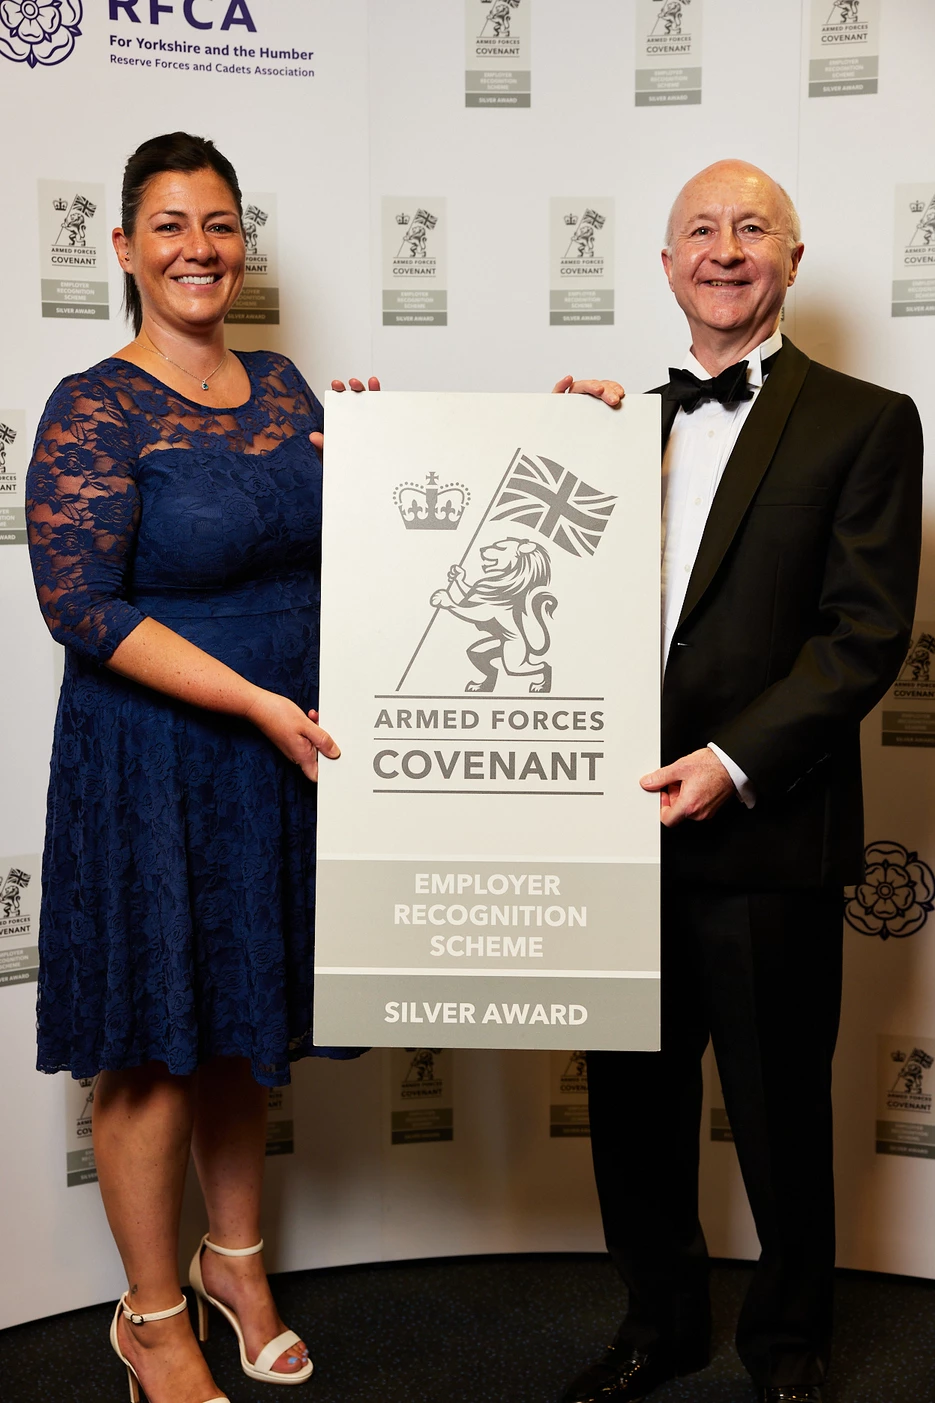 Sarah Roberts, Reed Boardall group financial director, and chief executive Marcus Boardall, receiving the MOD Silver award